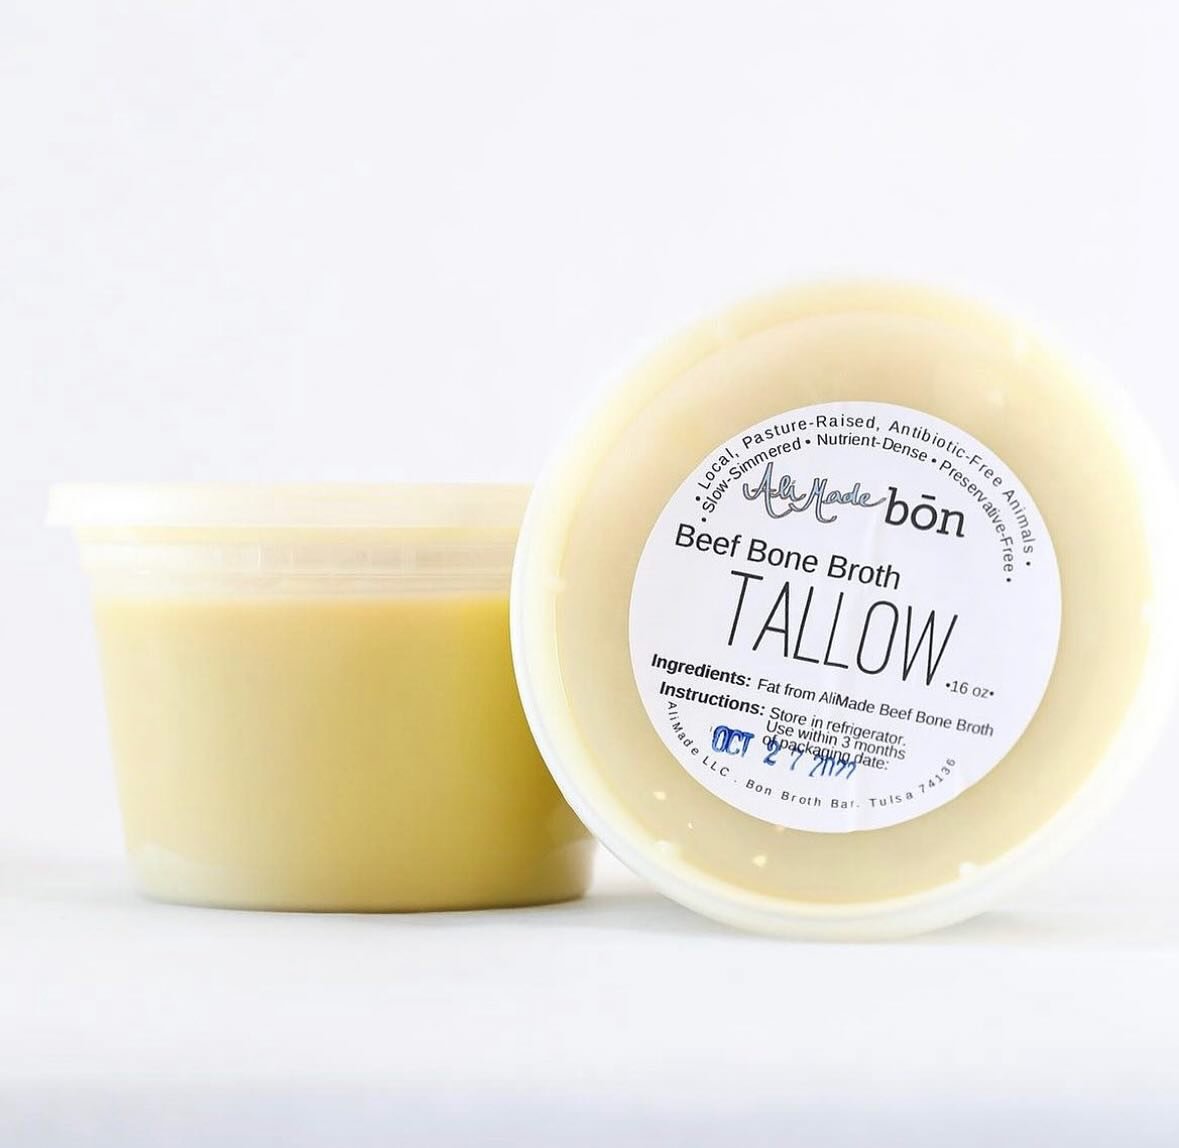 Calling Bone Broth Tallow &ldquo;The world&rsquo;s healthiest fat&rdquo; may sound too good to be true, but consider this: 
1. Fat from grassfed cows is high in omega-3s, anti inflammatory nutrients. It is considered my many the most easily digestibl